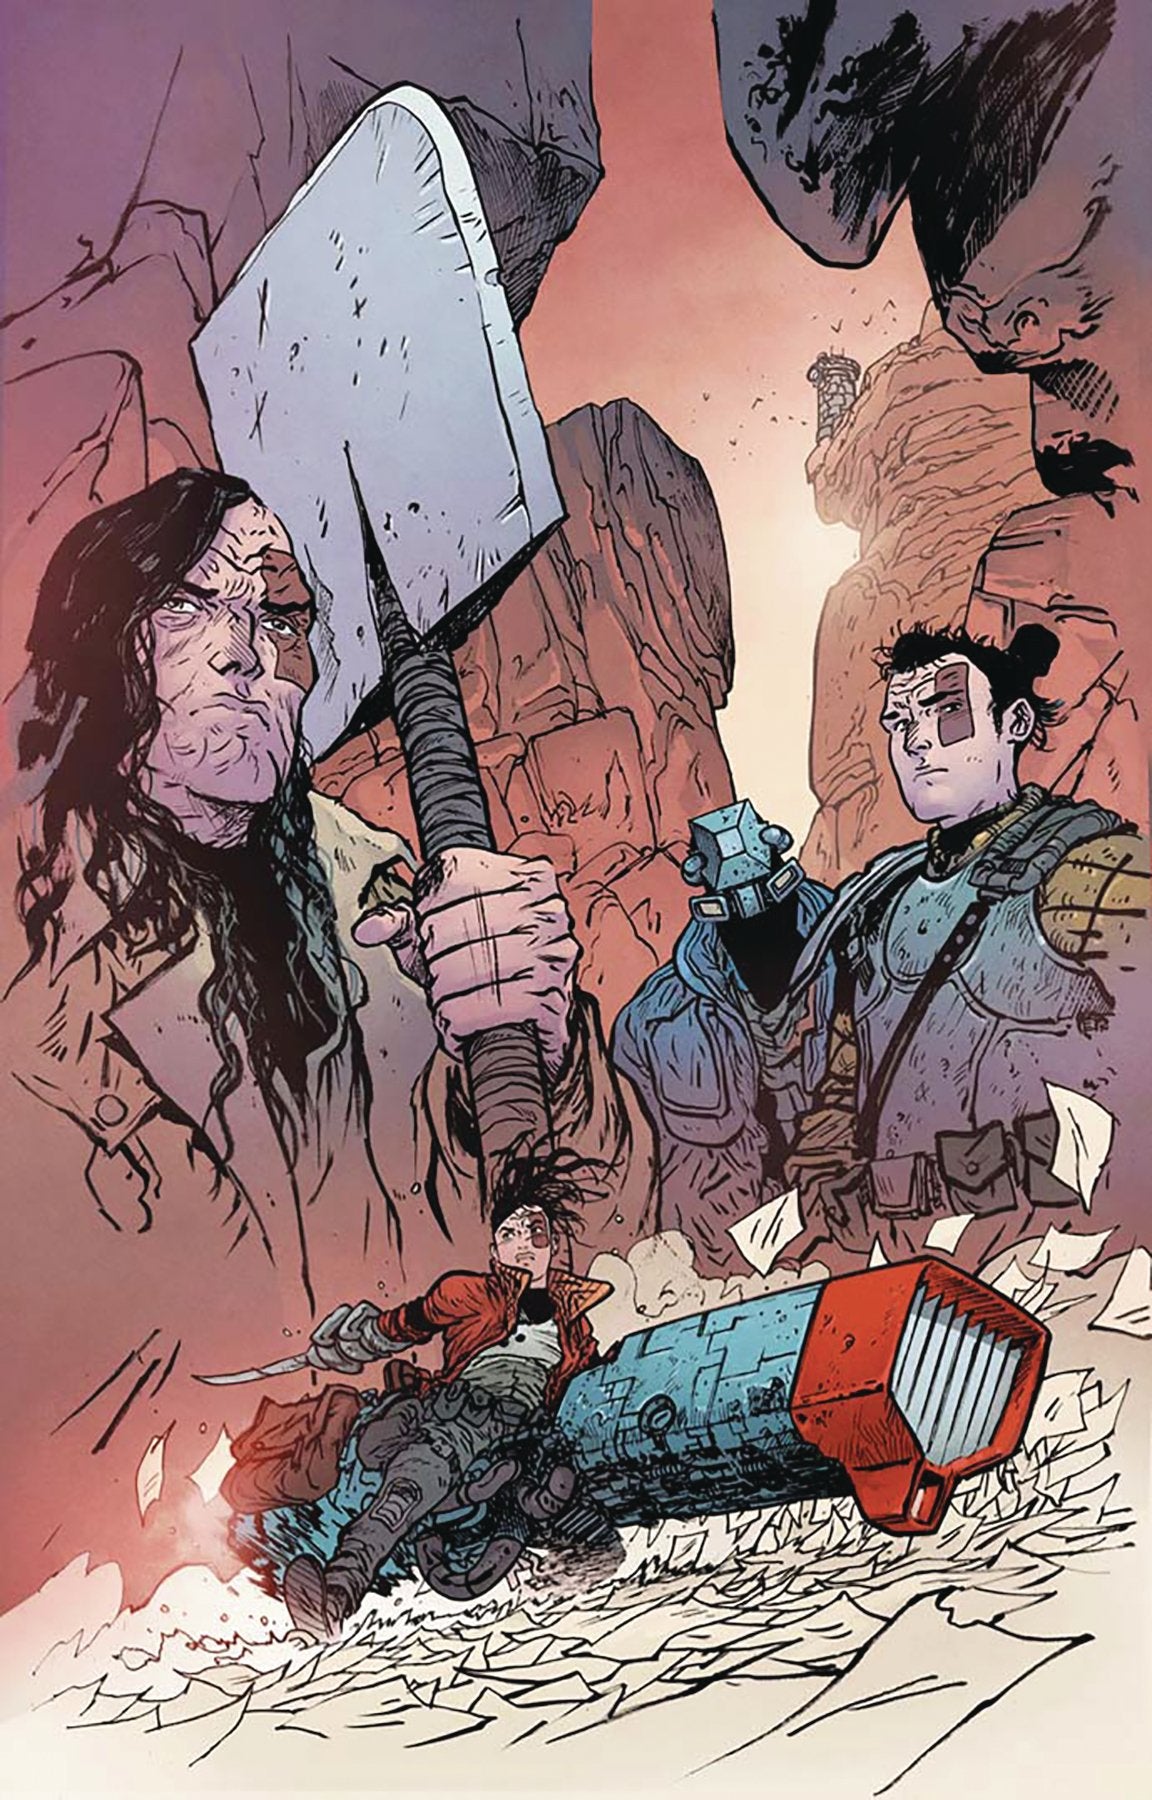 EXTREMITY TP VOL 01 ARTIST COVER